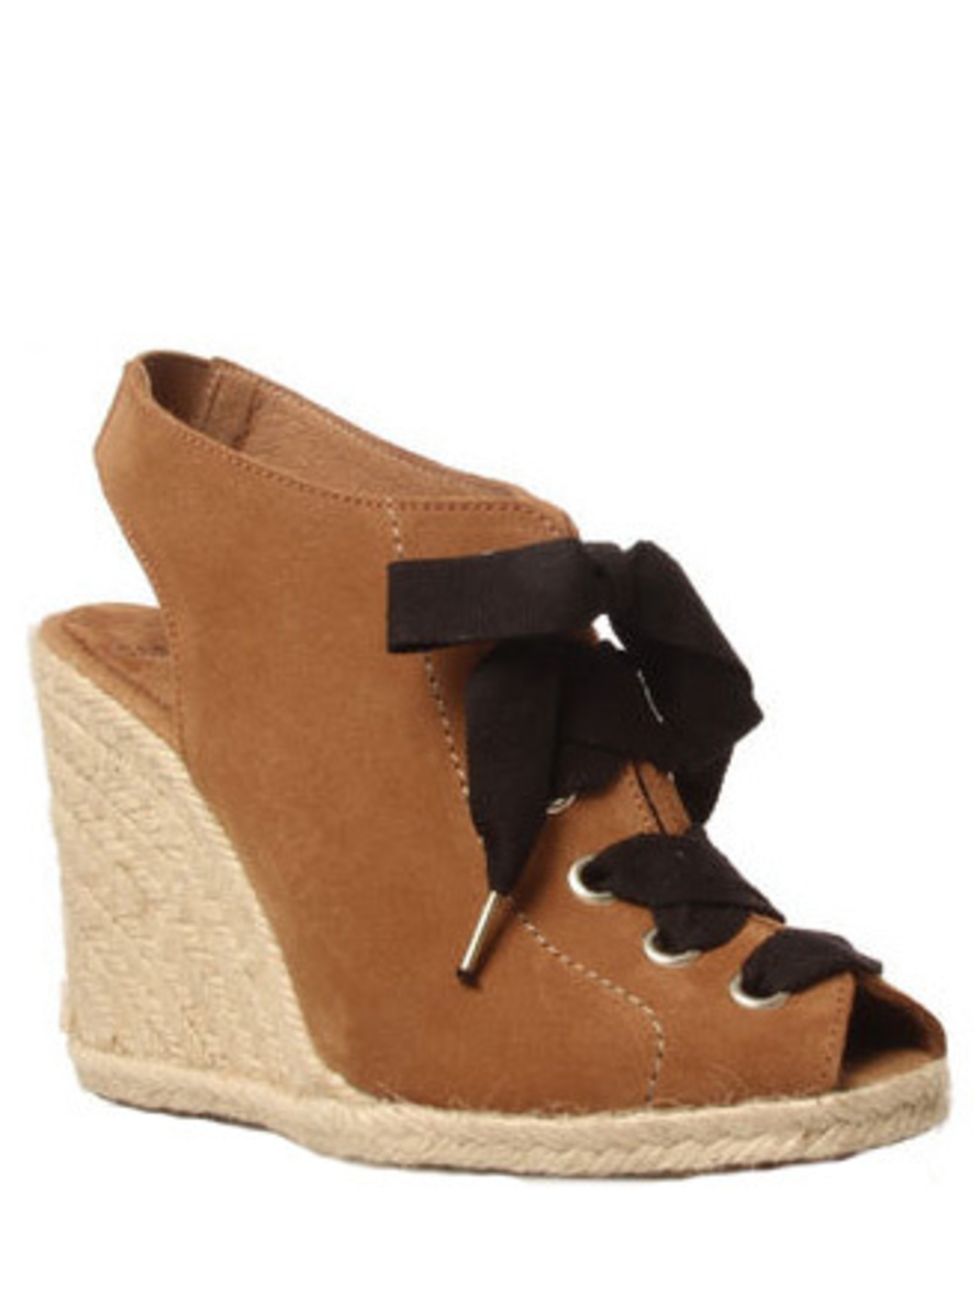 <p>These wedges will look perfect paired with the J.Crew shirt at weekends but are smart enough for the office too. </p><p>Wedges, £95 by Carvela</p>